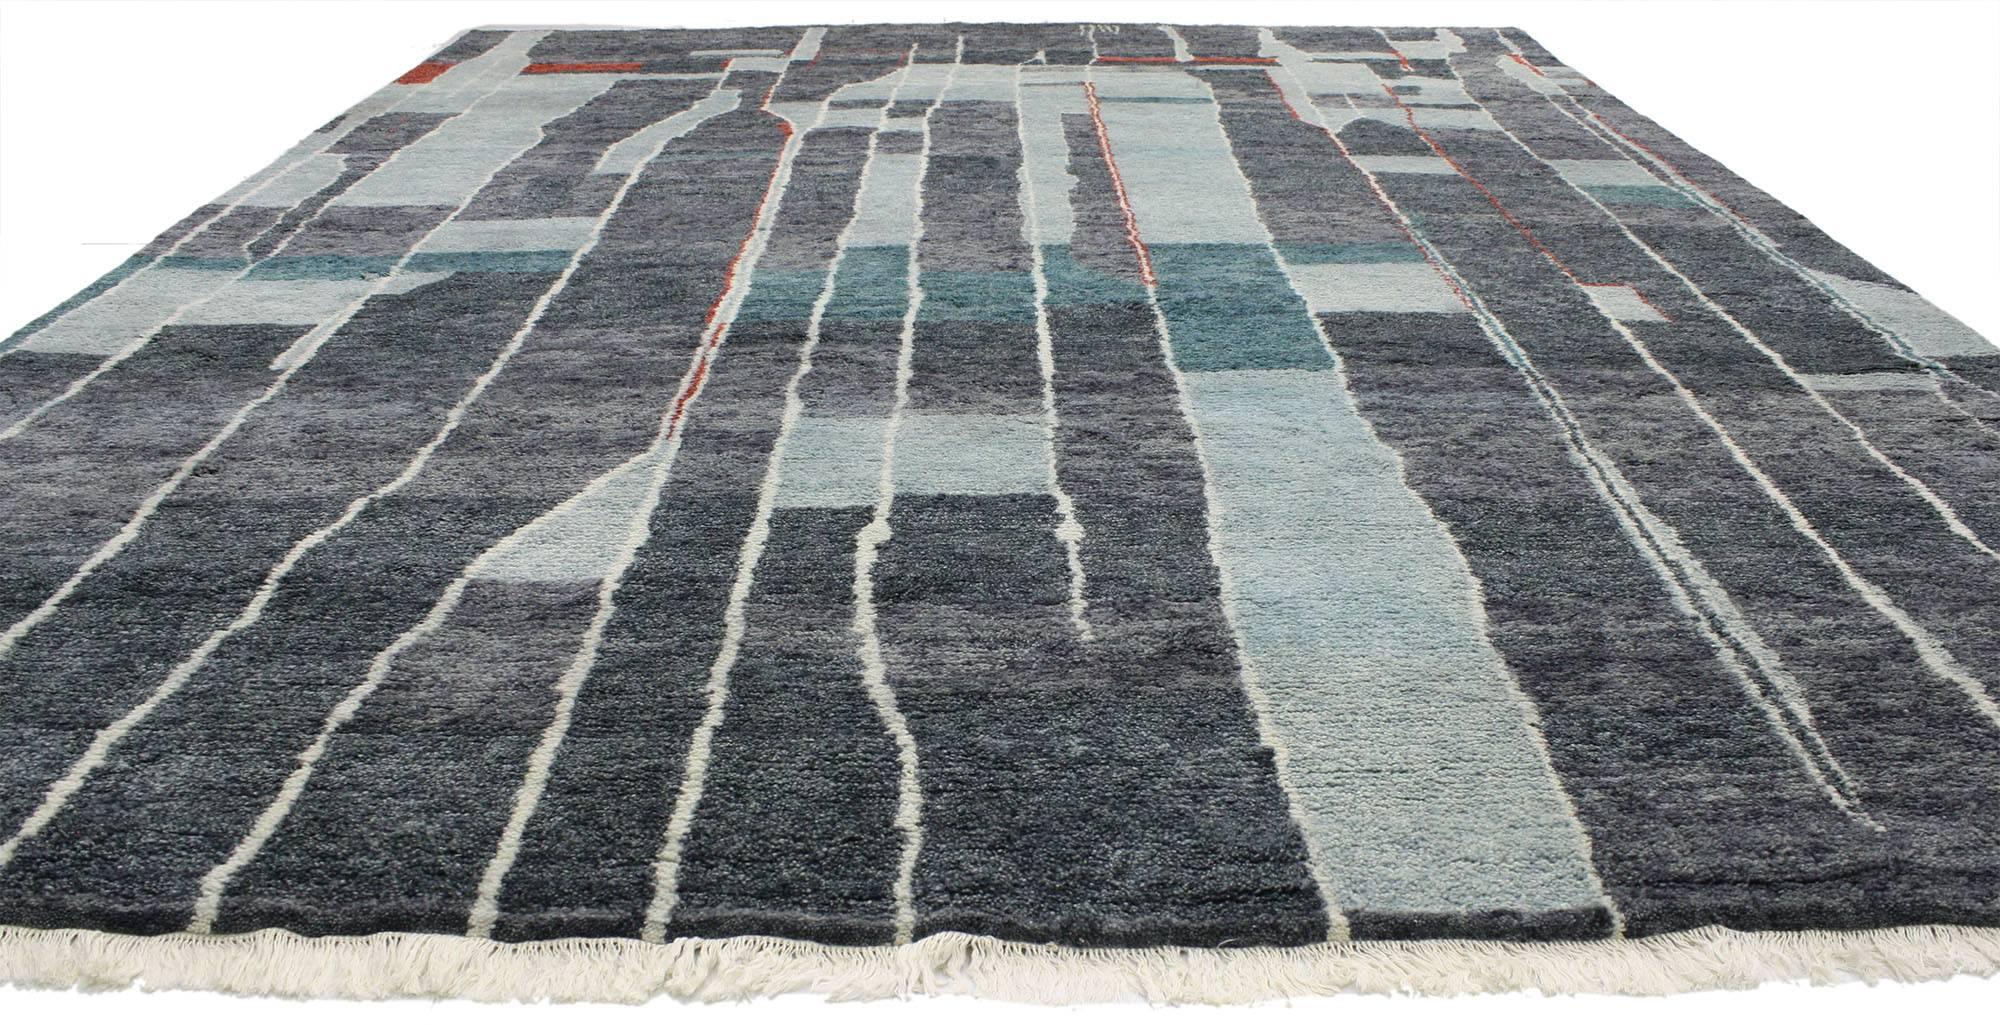 30352, Contemporary Moroccan Style Rug with Modern Bauhaus Design, Gray-Teal Area Rug. Highly stylish yet casually elegant, this contemporary Moroccan rug with modern design is ideal for nearly any fashionable space. A series of asymmetrical lines